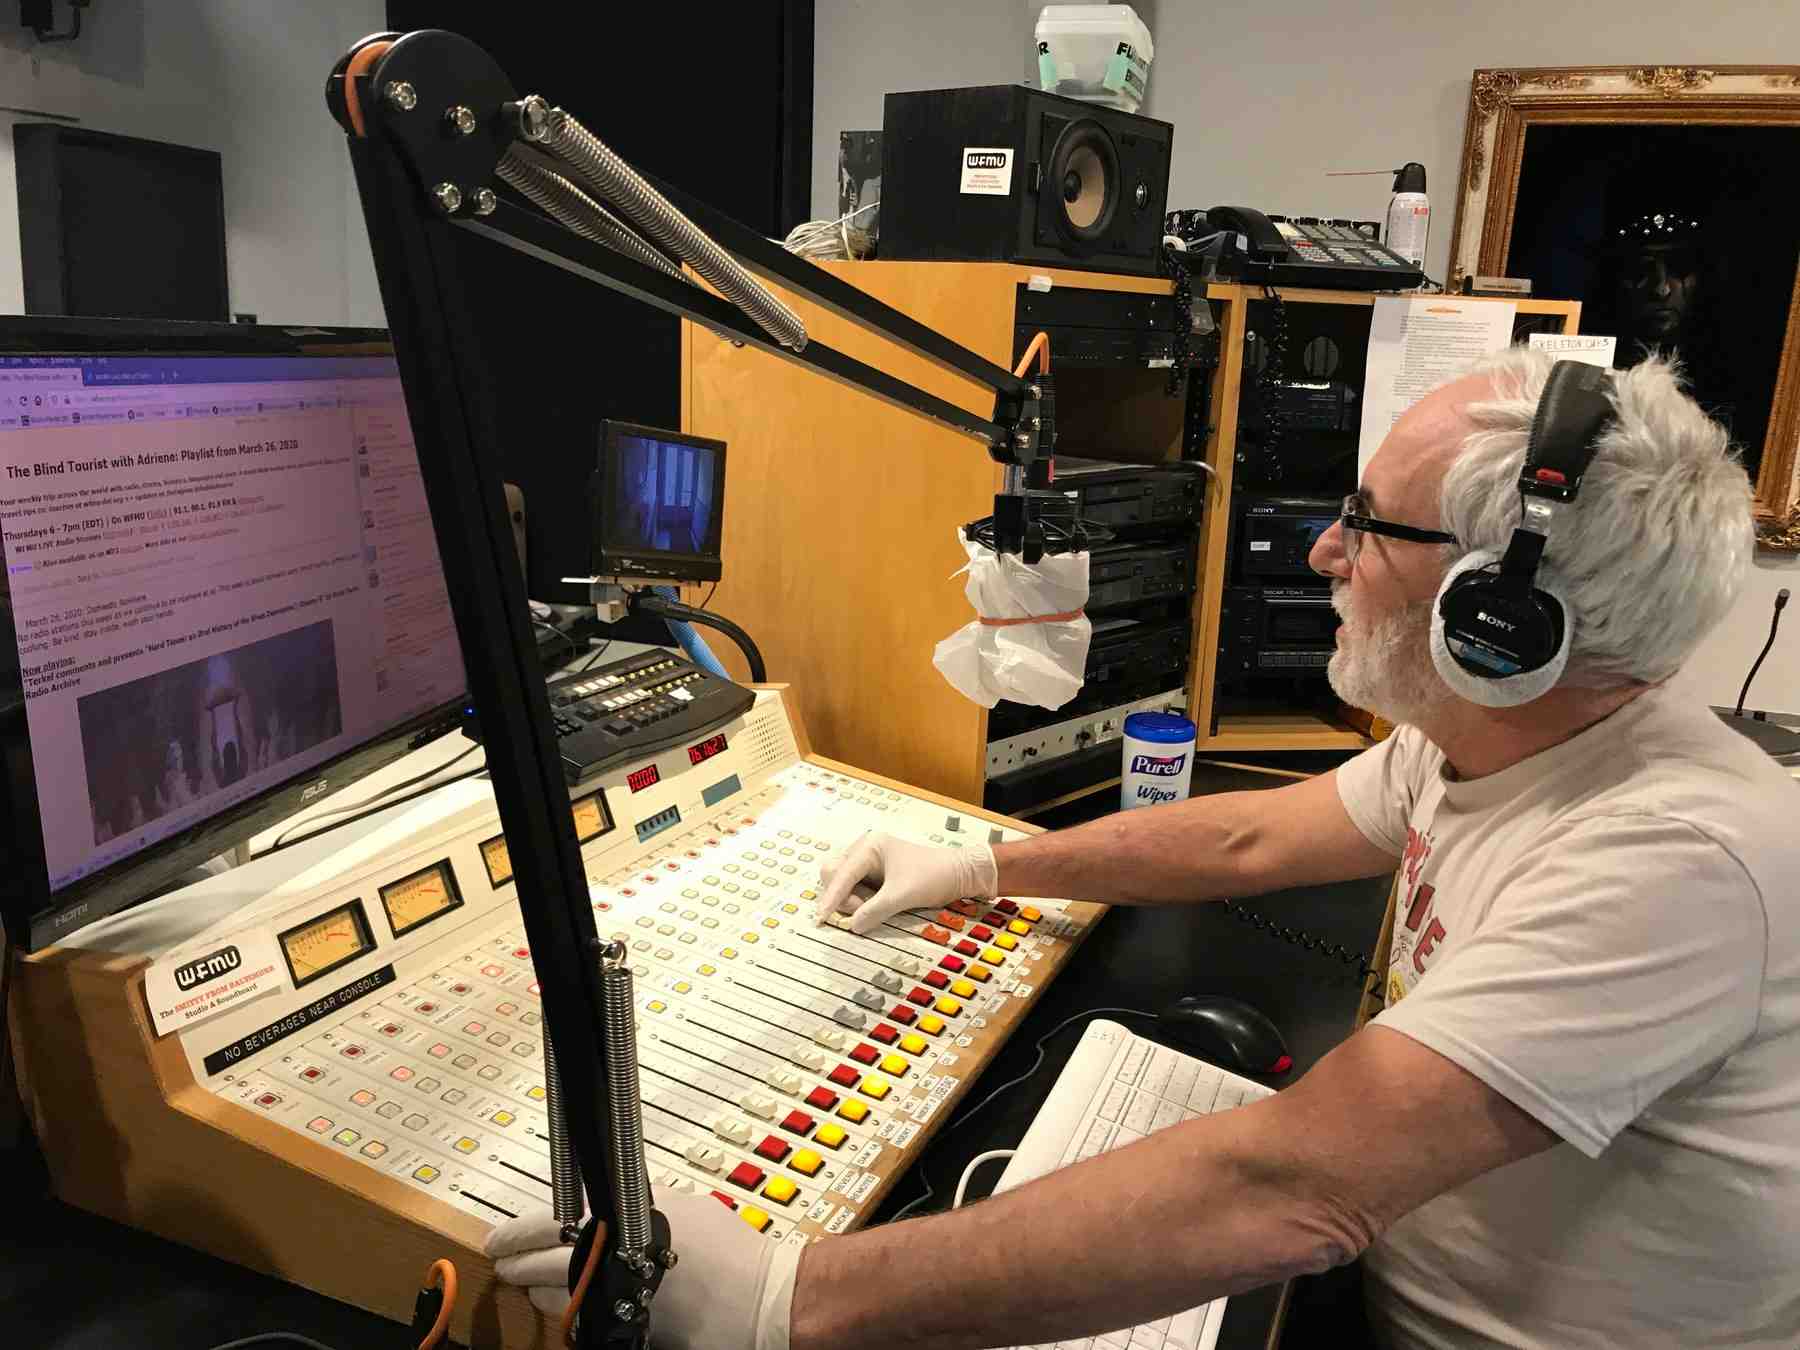 What are the advantages of radio over other mass media?